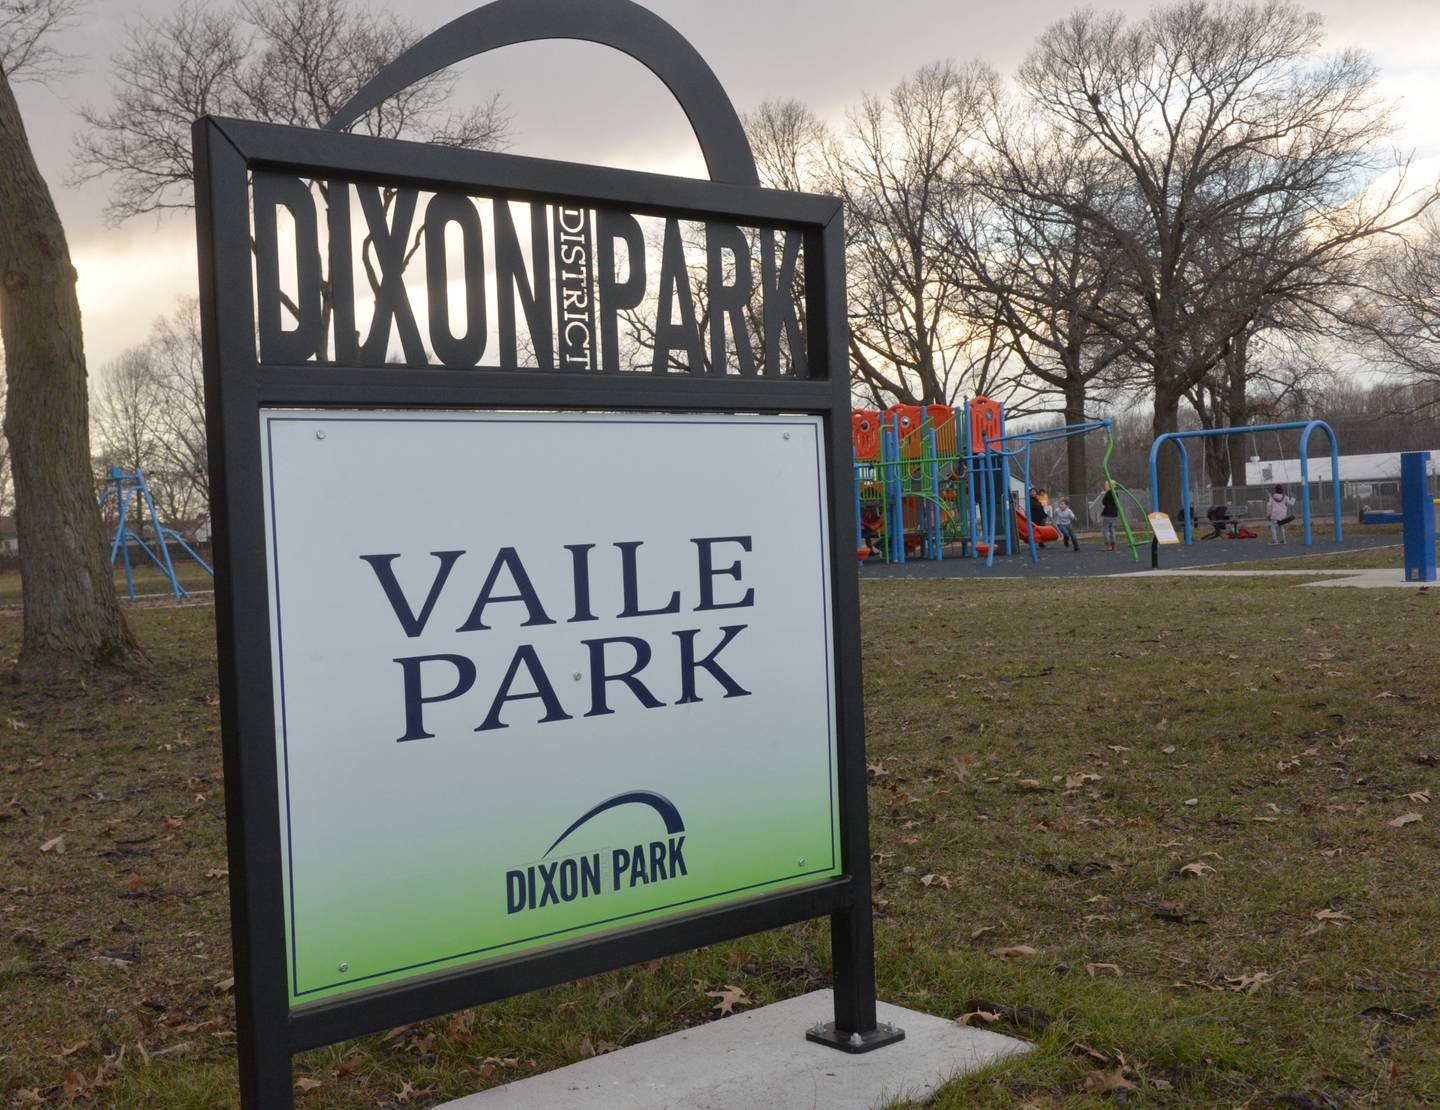 The basketball court at Vaile Park in Dixon is slated to be redone after the Dixon Park District received a state grant to improve the court.